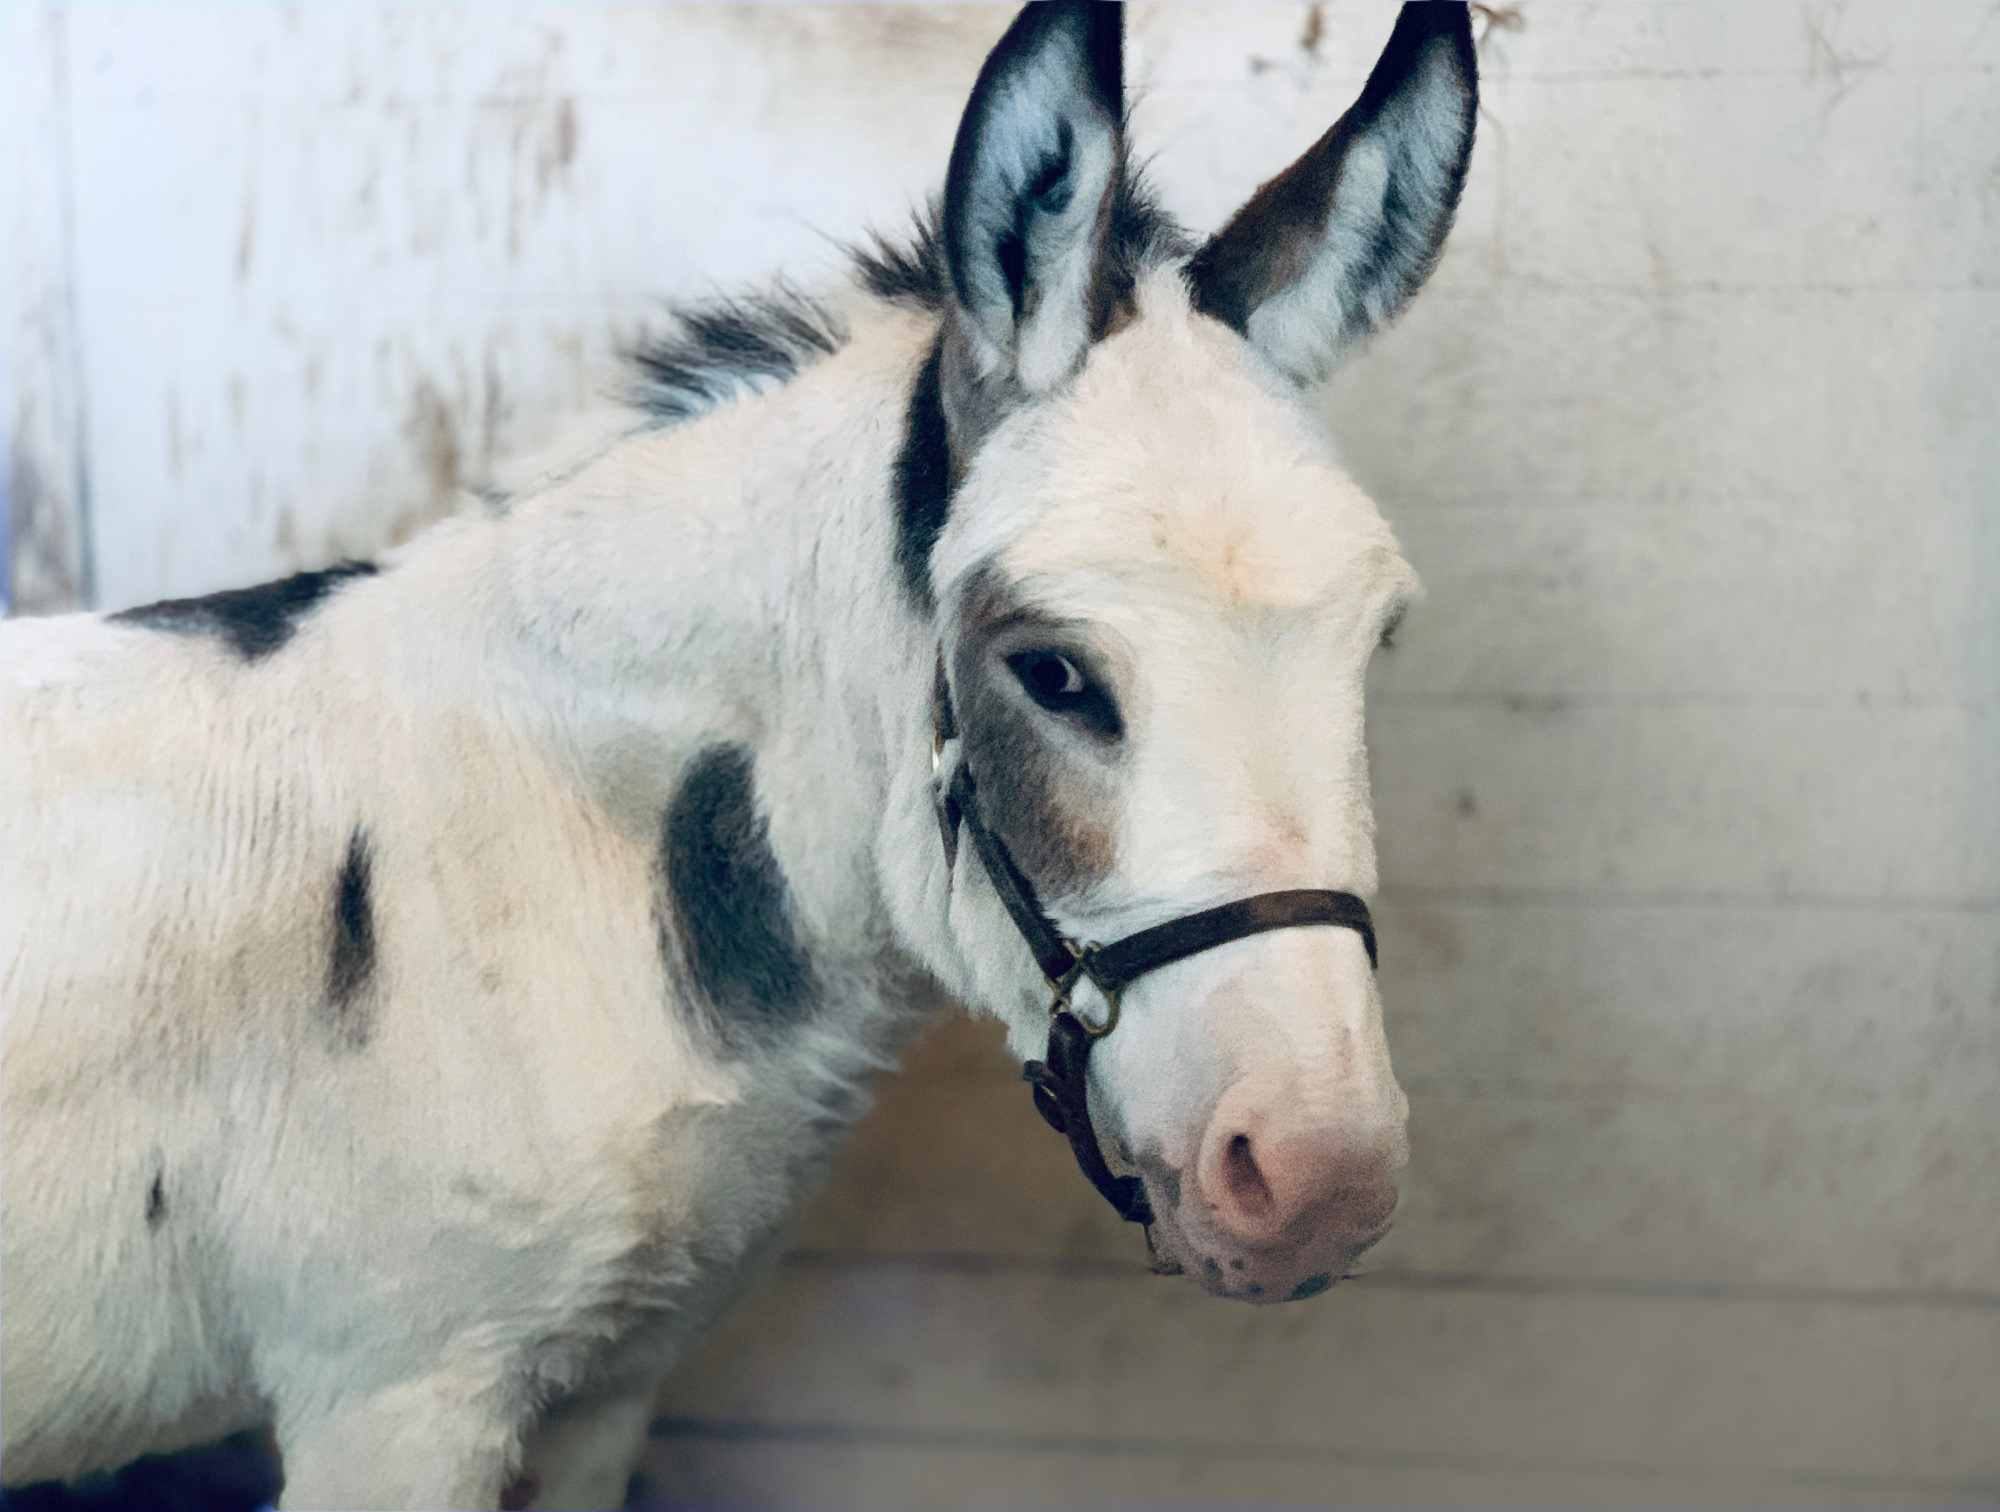 Sunny, our mini donkey, posing for the camera.